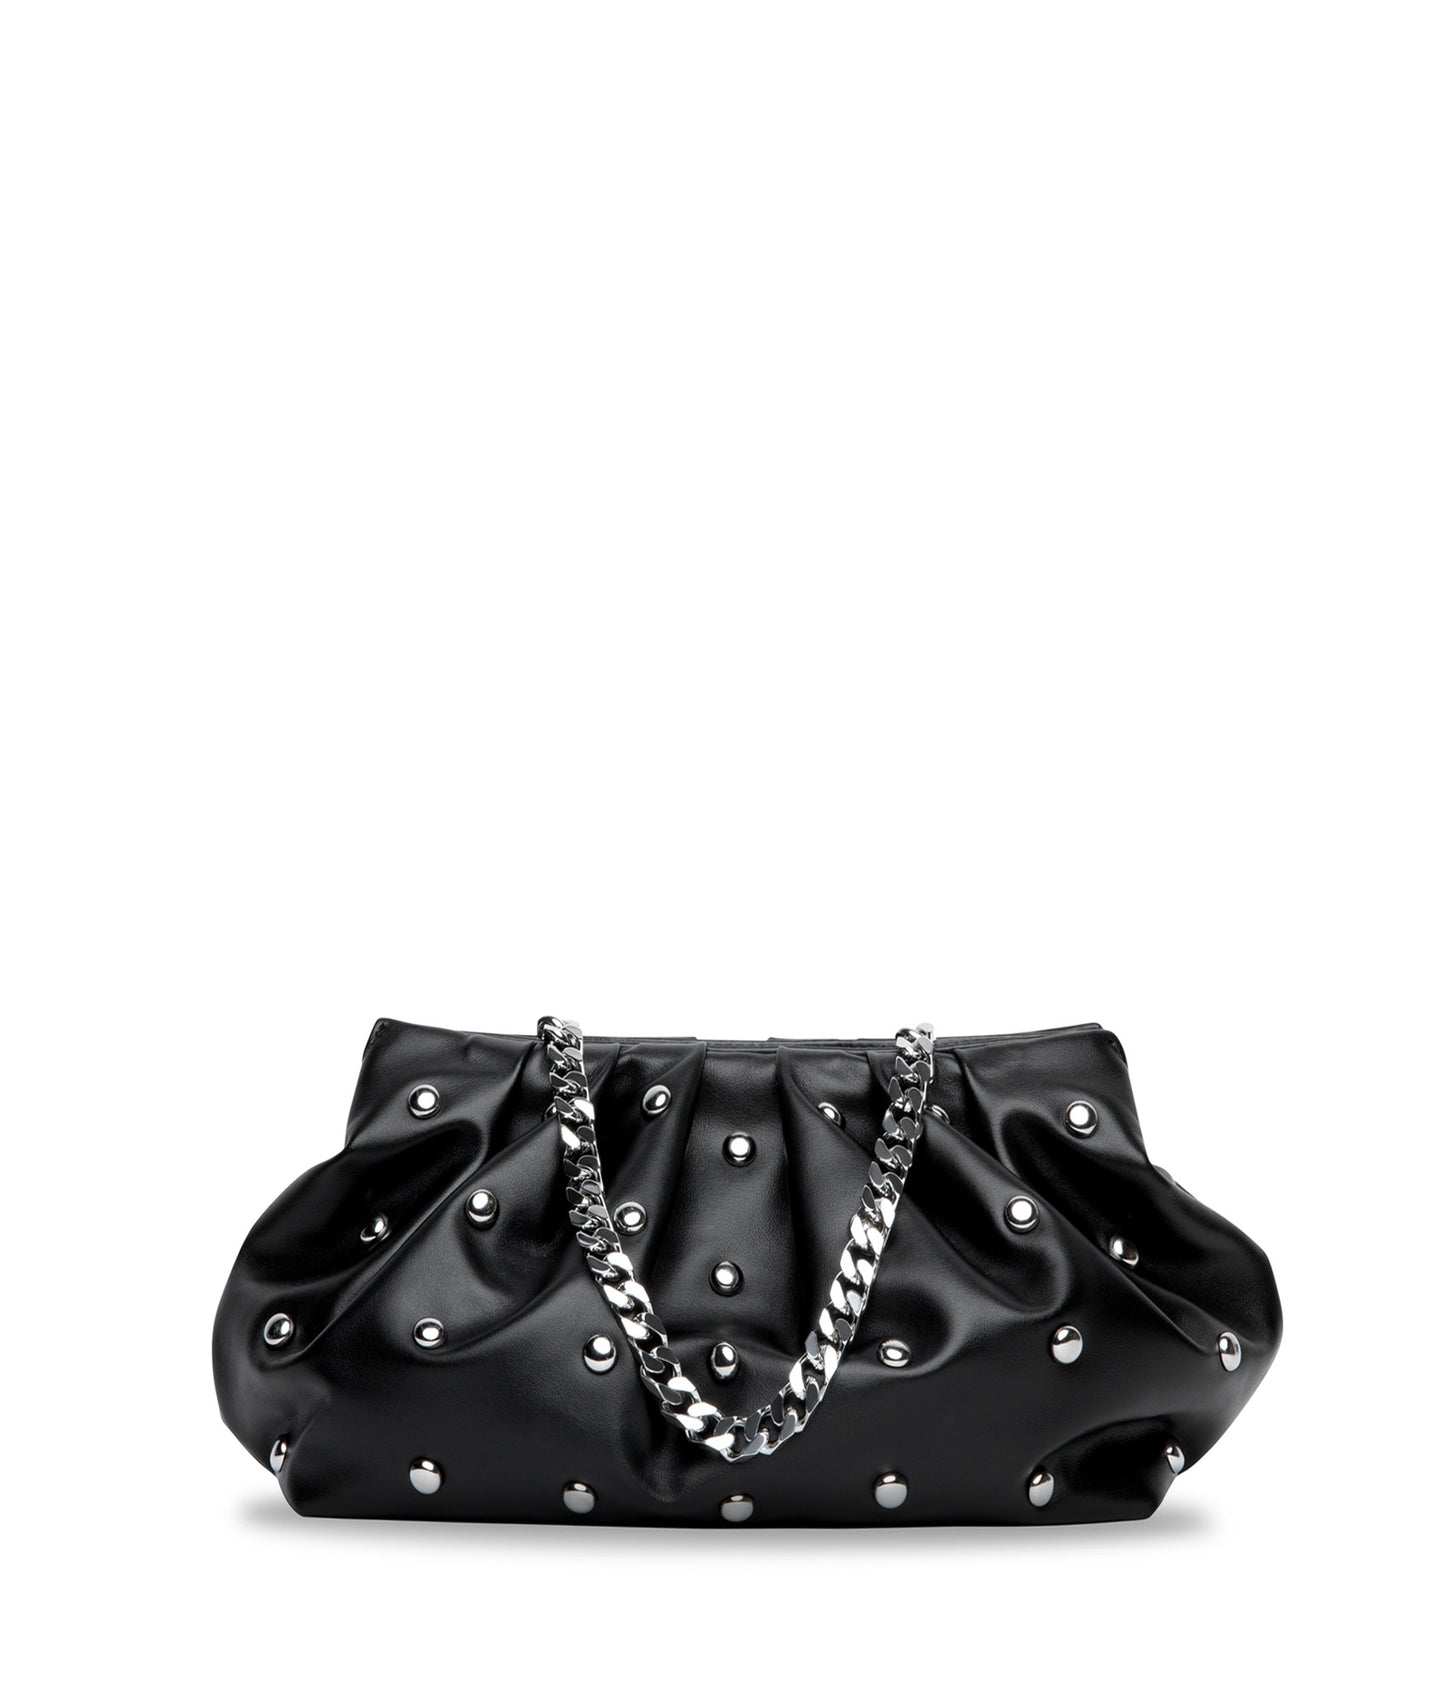 Julie in Black Italian Leather with Studs